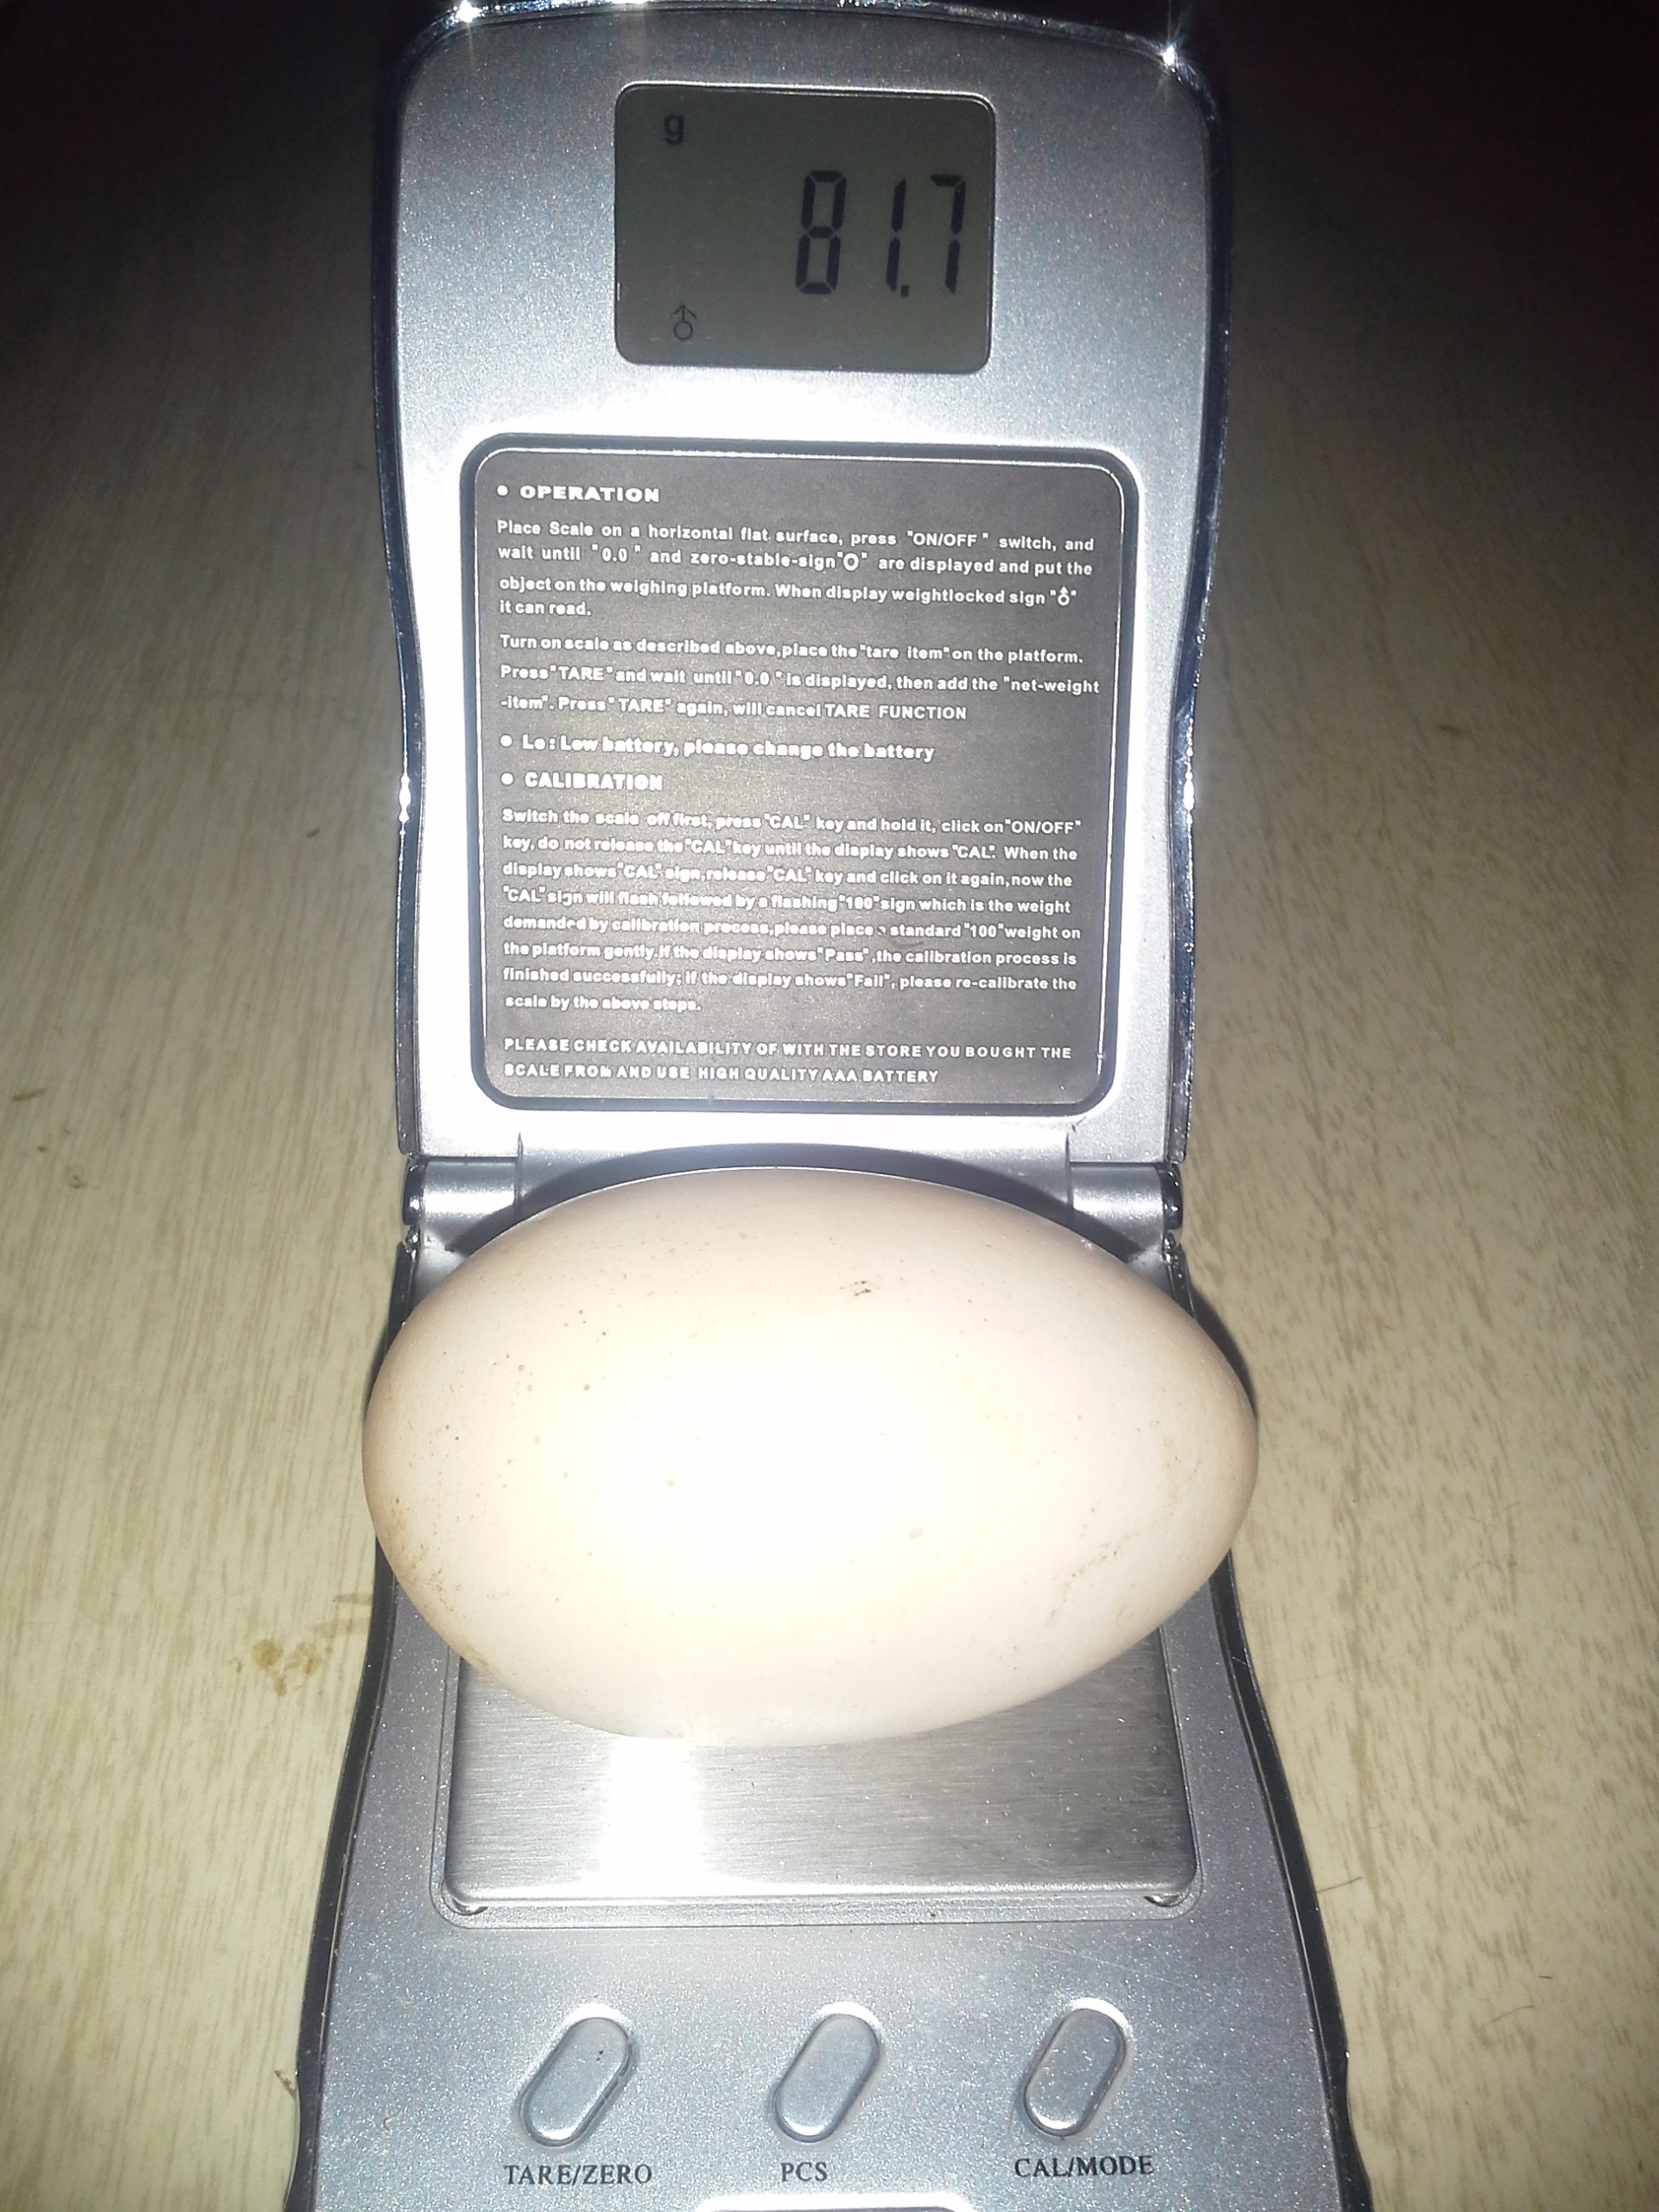 And we thought this was the biggest egg we'd ever seen...